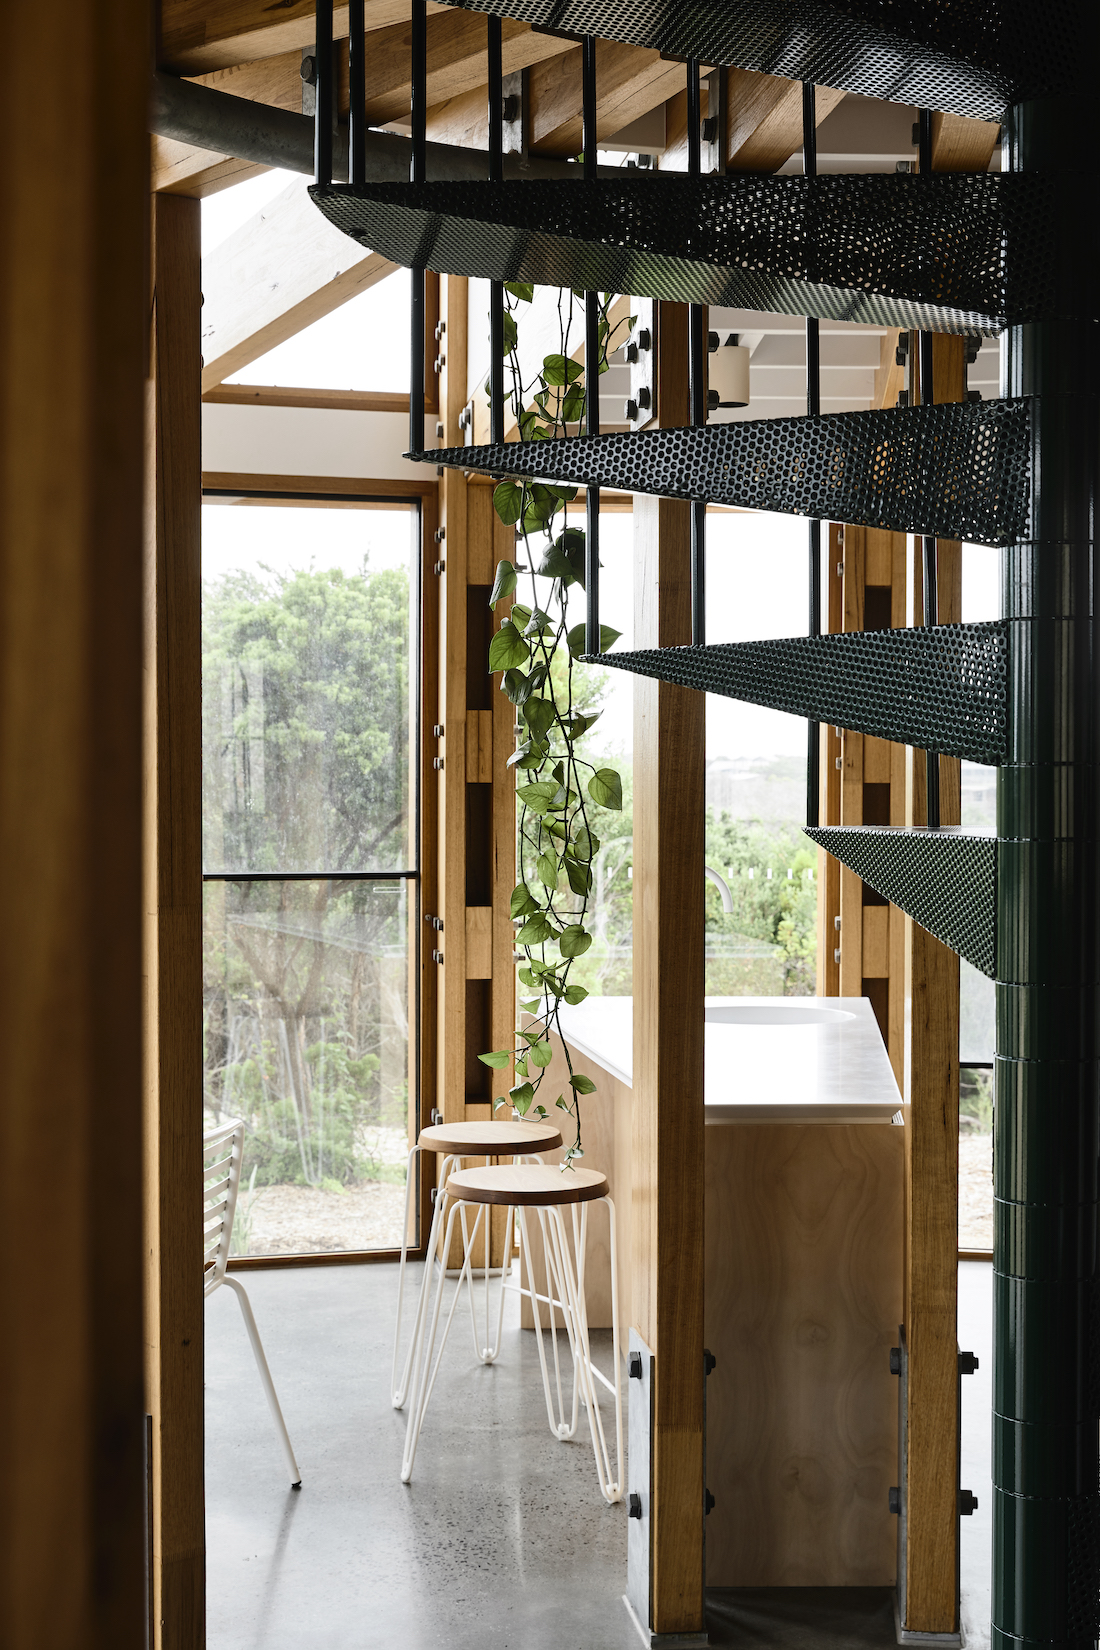 Green spiral staircase with trailing plant and timber kitchen